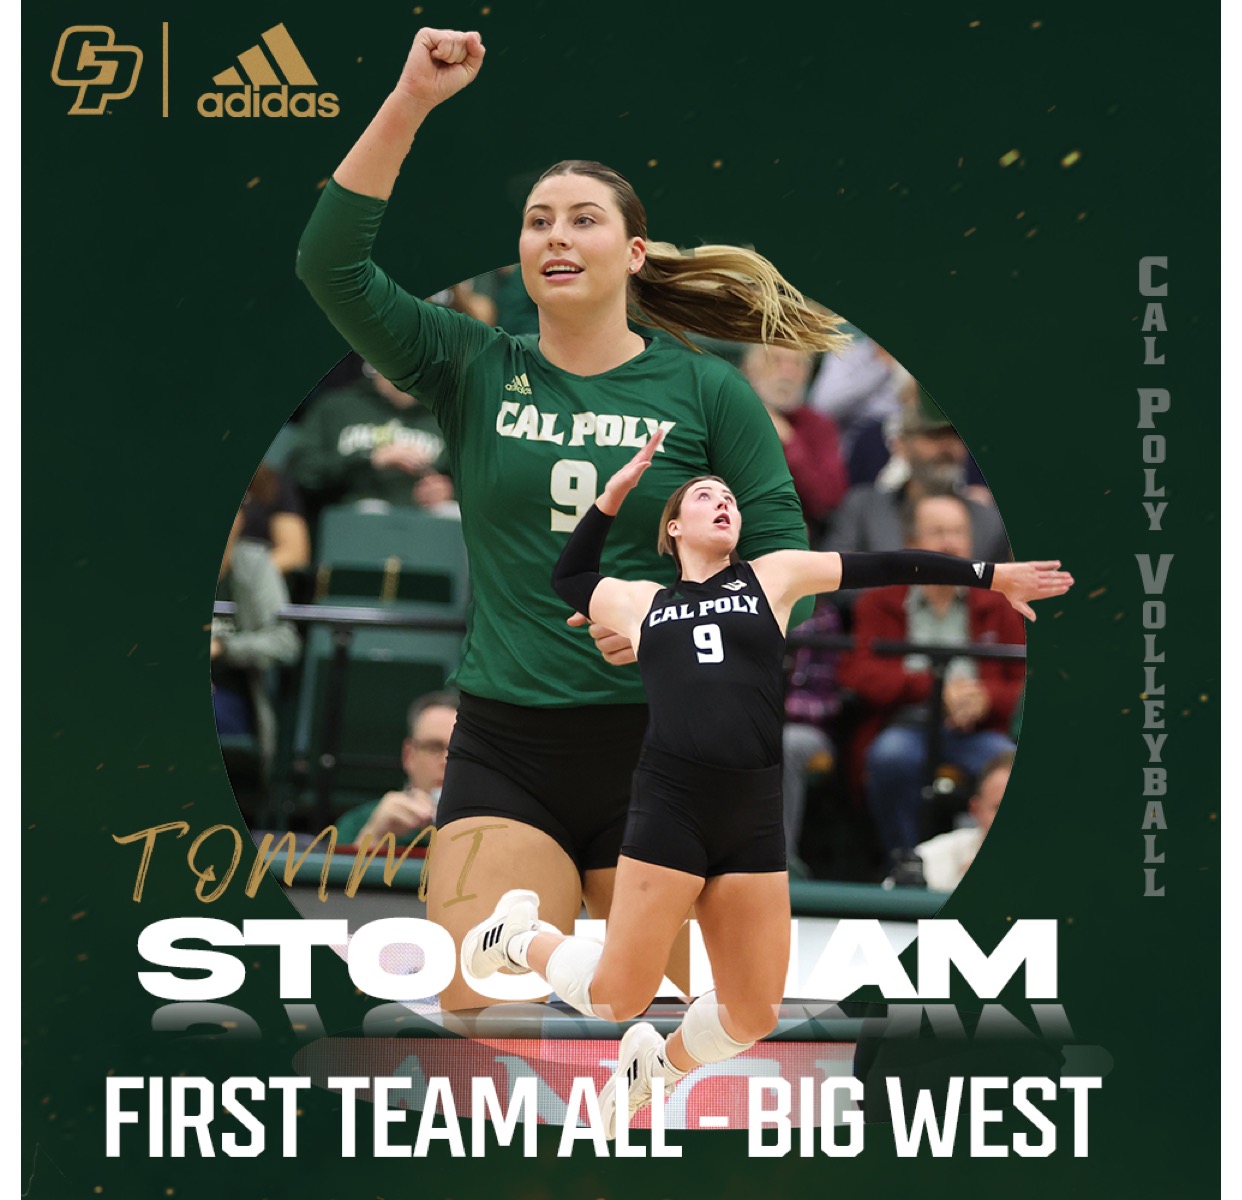 Tommi Stockham All Big West Conference sophomore former Coach April Chapple private client 3 years